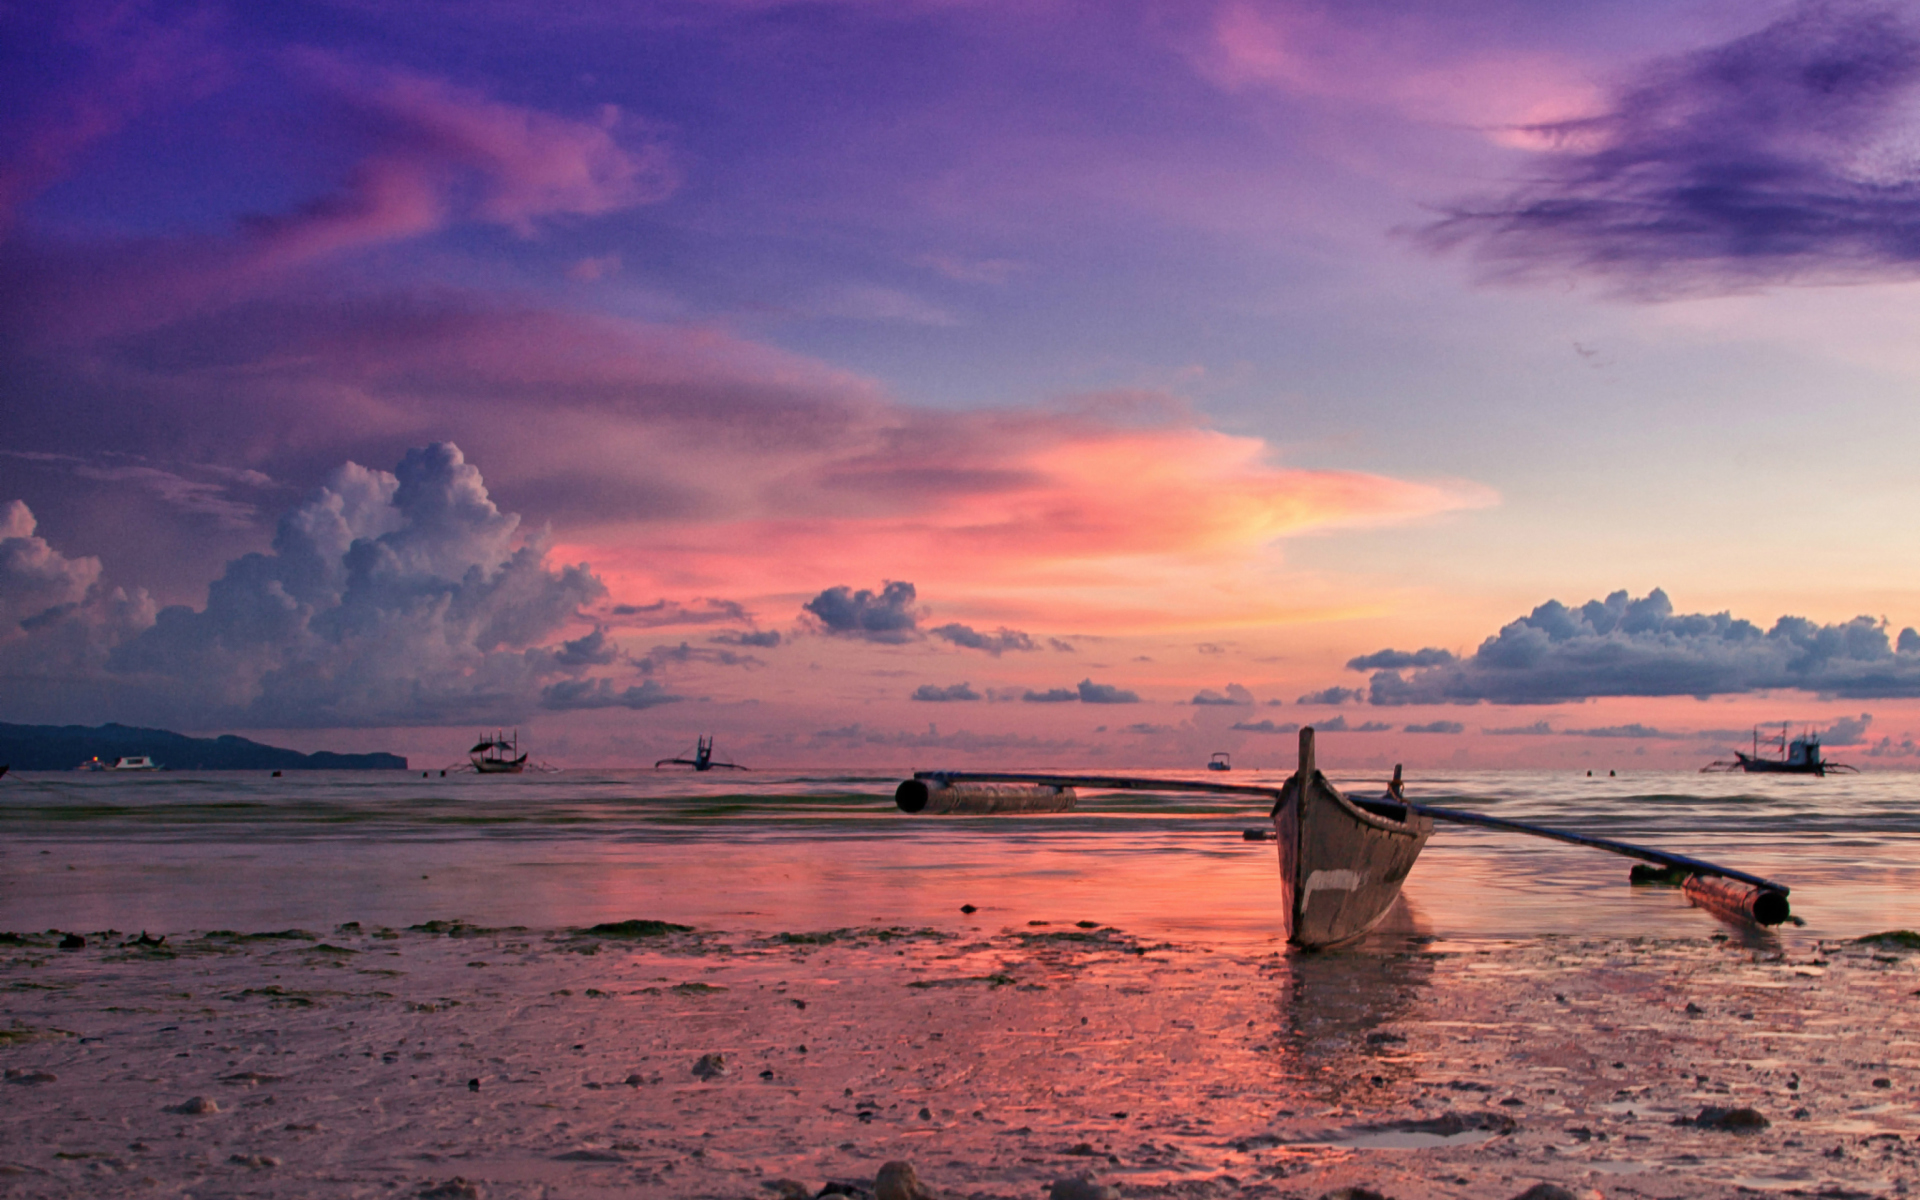 Das Pink Sunset And Boat At Beach In Philippines Wallpaper 1920x1200